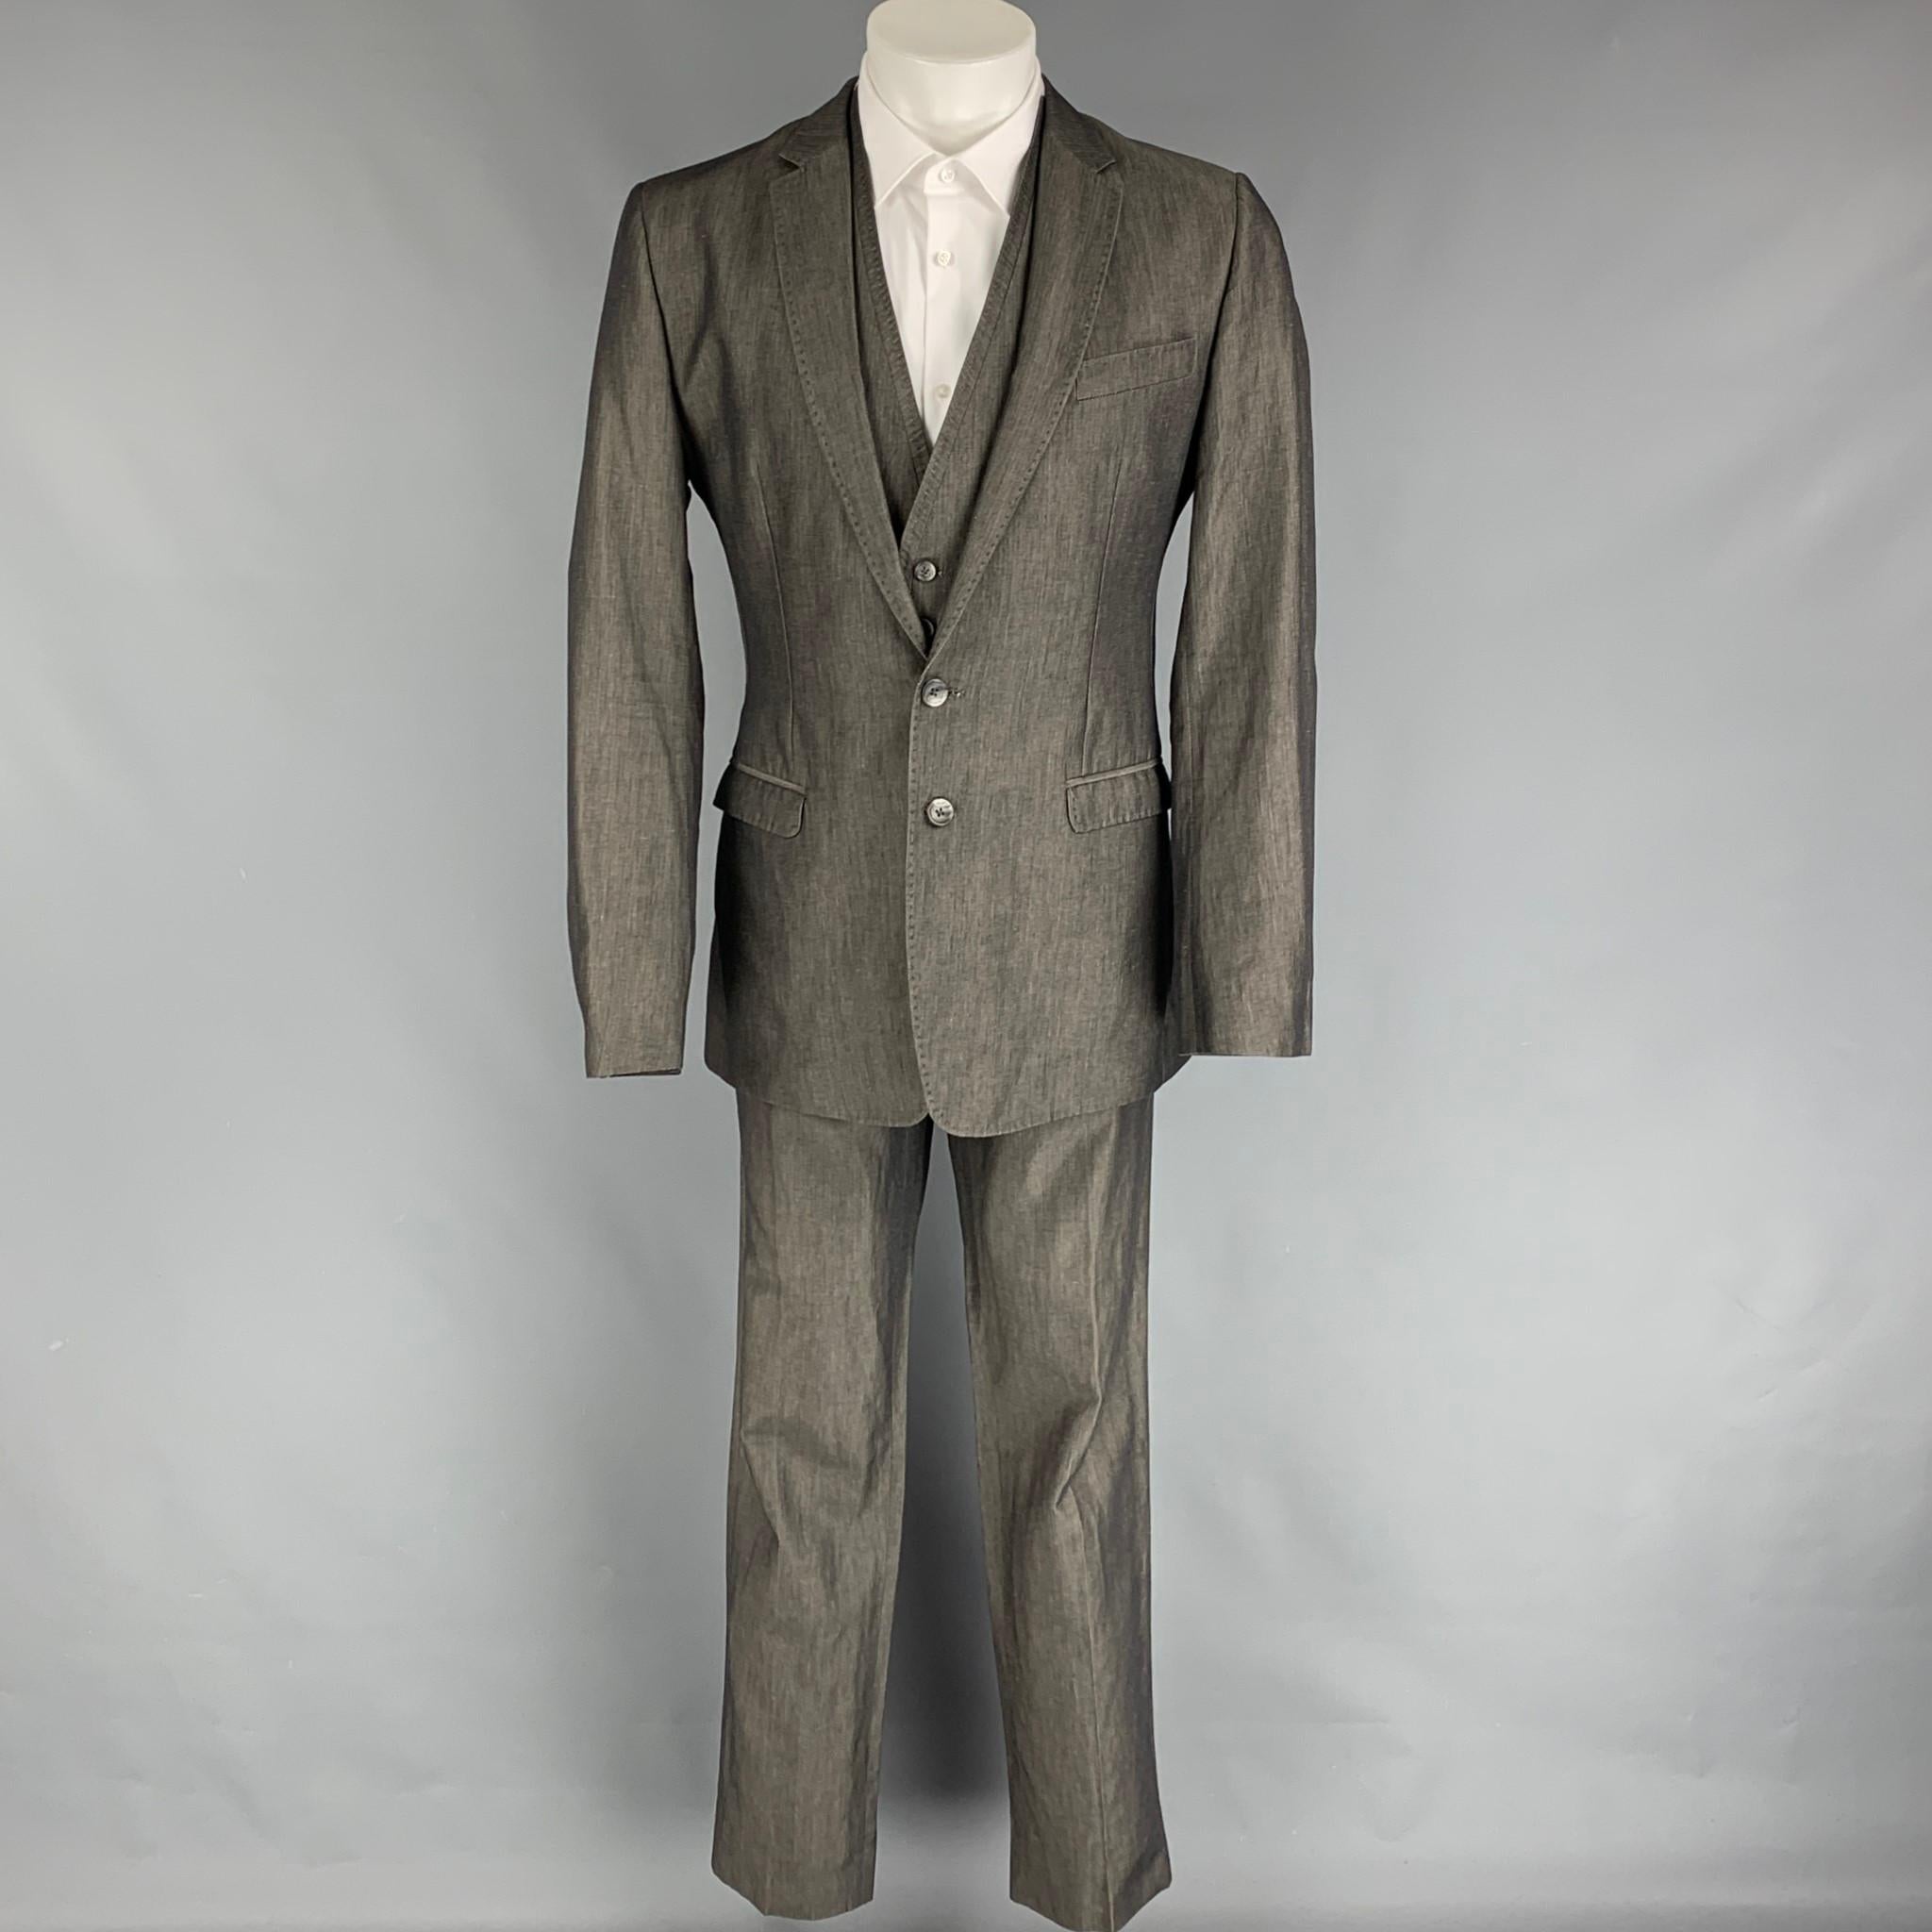 D&G by DOLCE & GABBANA 3 Piece suit comes in grey cotton / linen with a full liner and includes a single breasted, double button sport coat with a notch lapel and a matching vest and flat front trousers. Made in Italy.

Very Good Pre-Owned